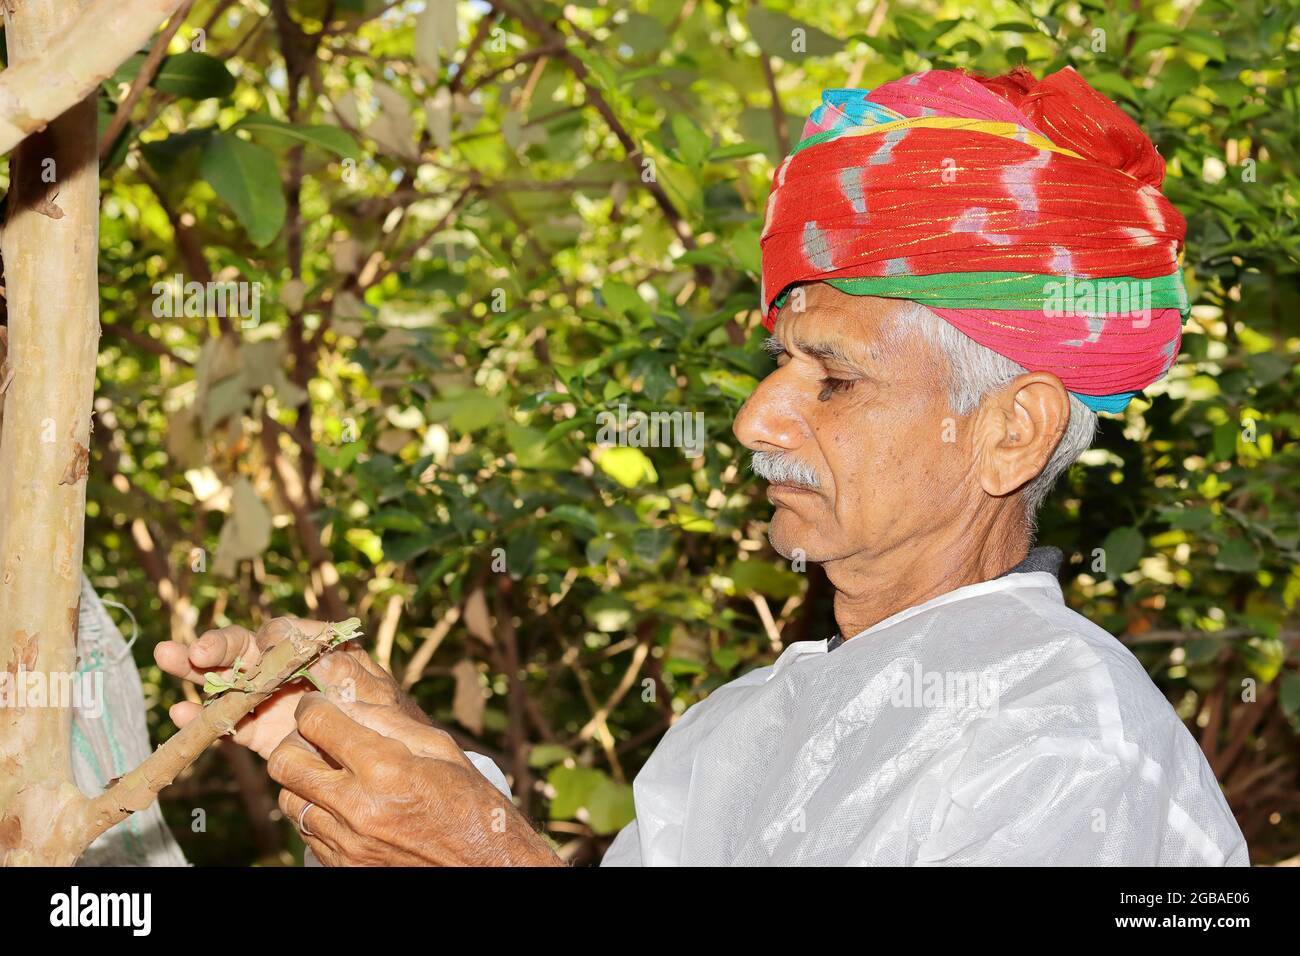 Close-up profile view of An Asian farmer standing in the garden, wearing a colorful turban and white dress, looks at a growing new guava branch Stock Photo